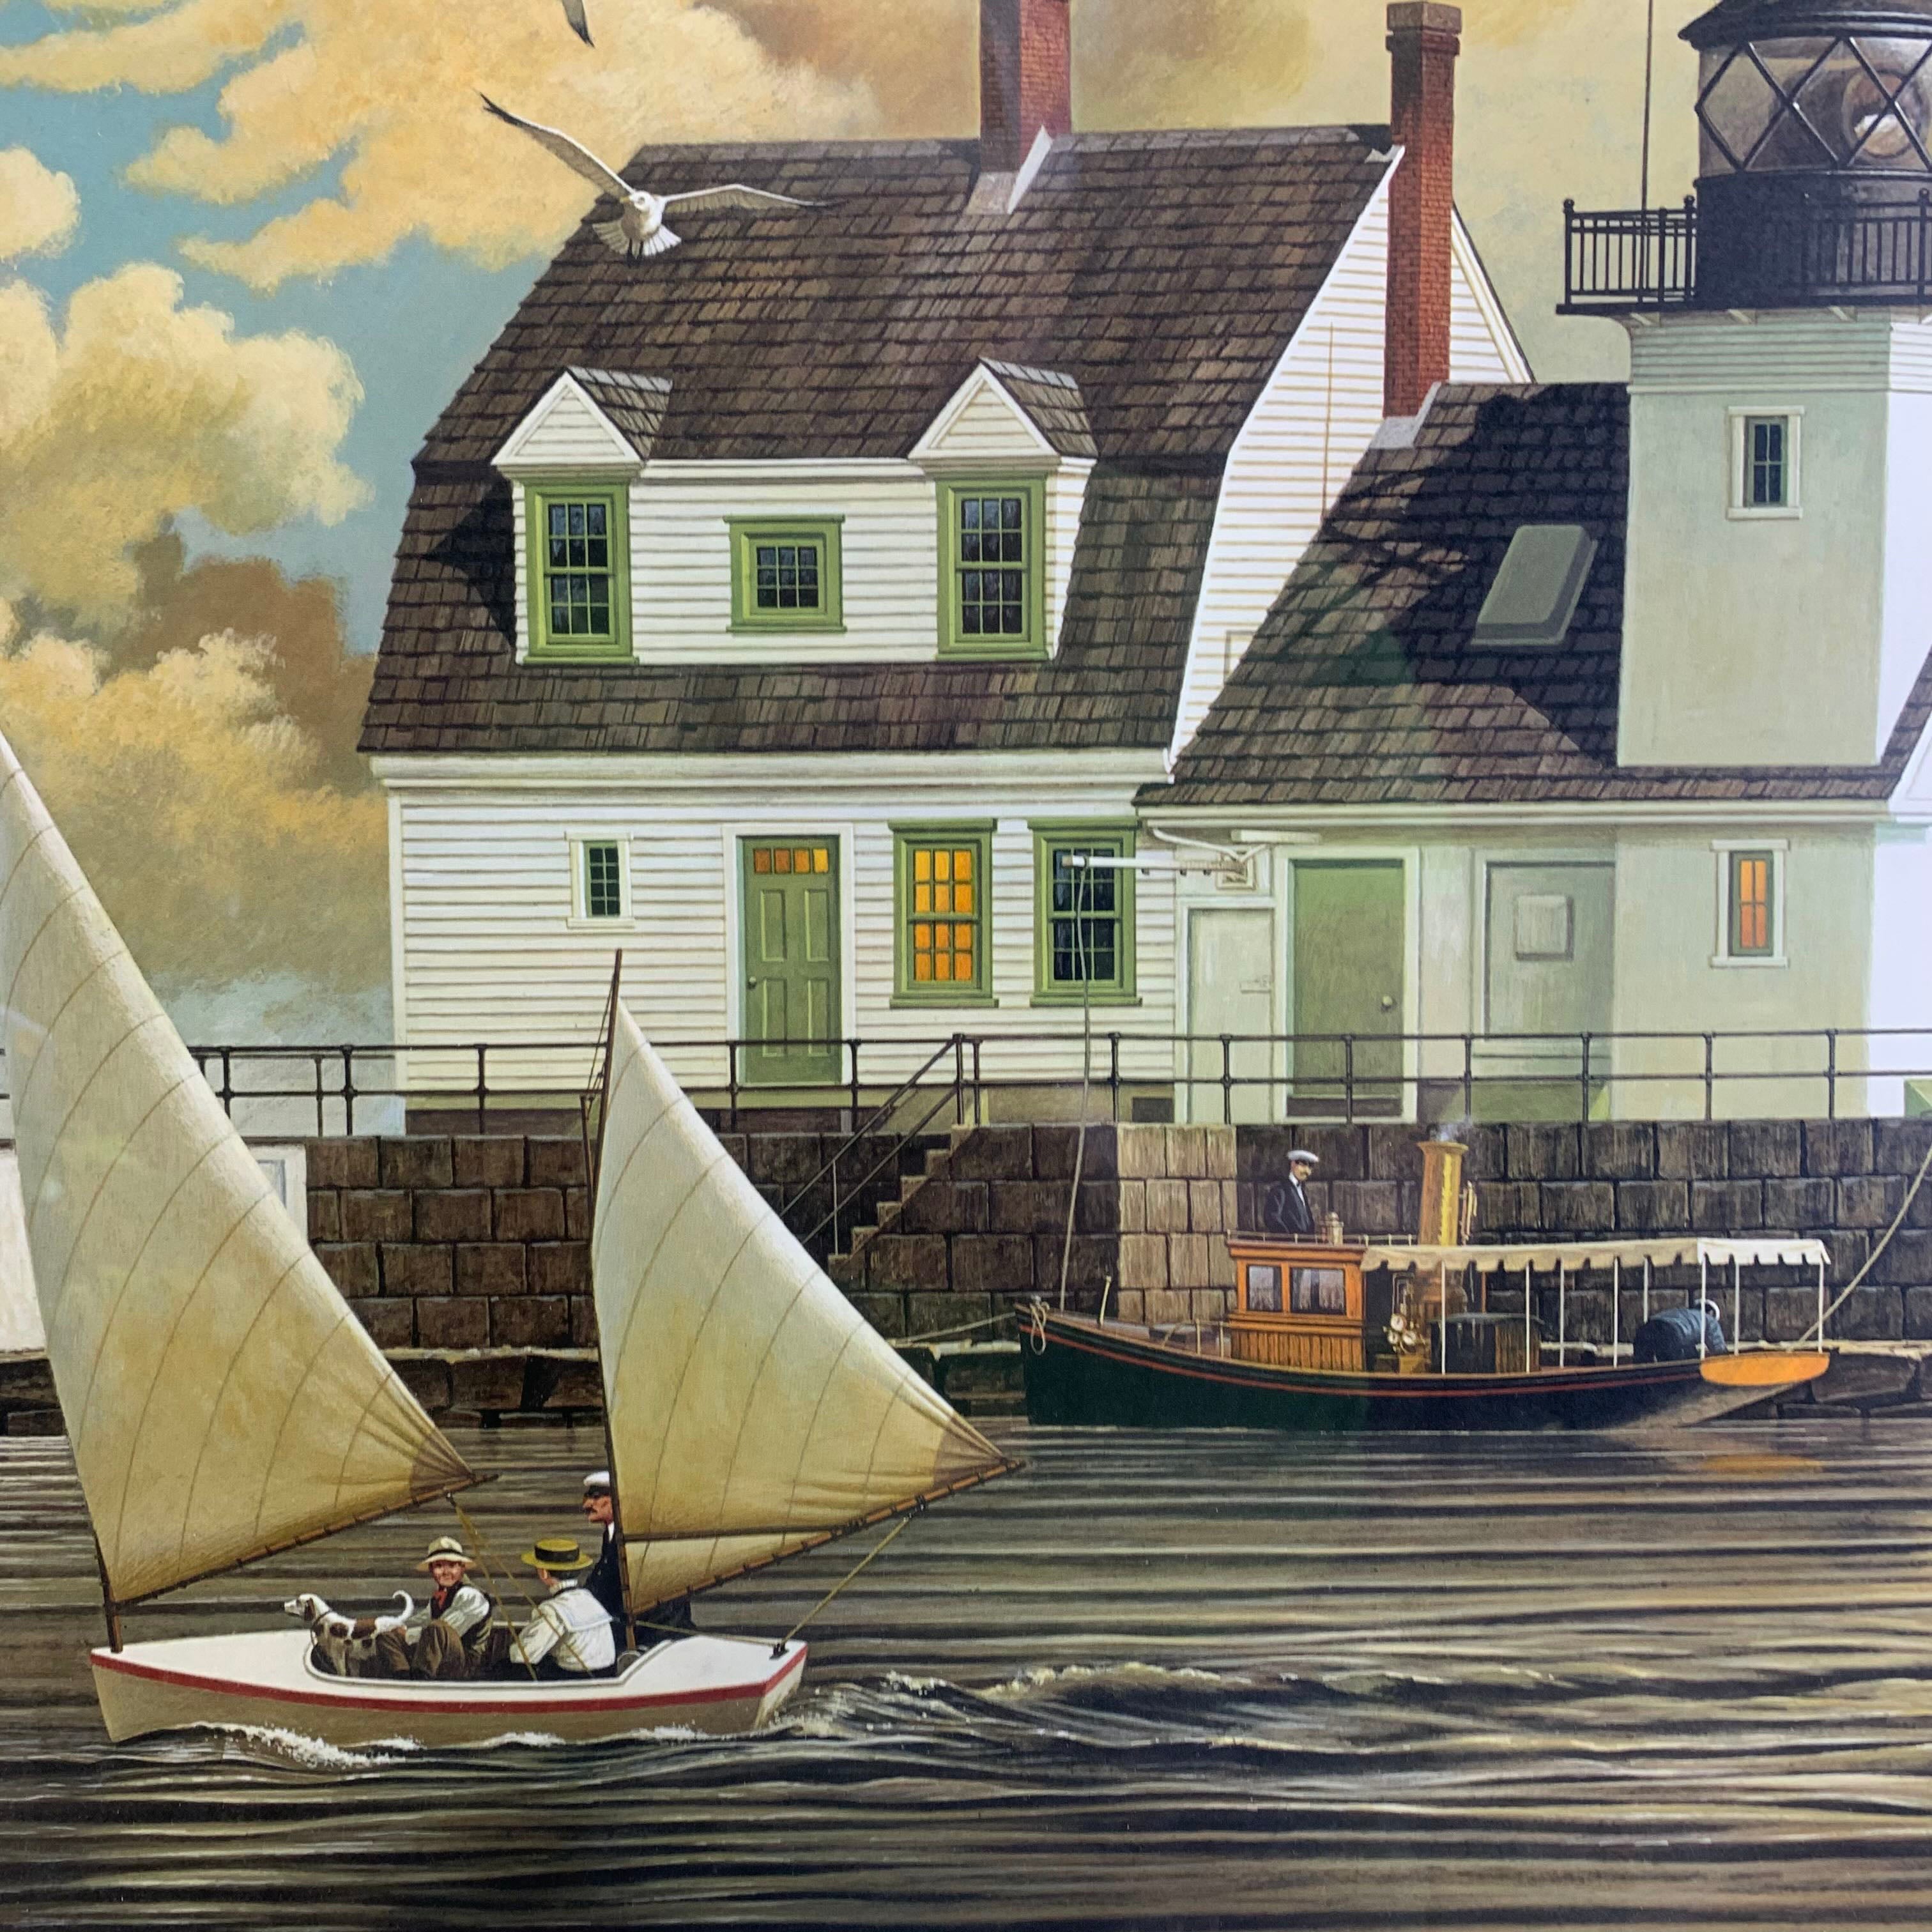 26"x 23" Rockland Breakwater Light By Charles Wysocki Framed and Signed Print 2467/2500